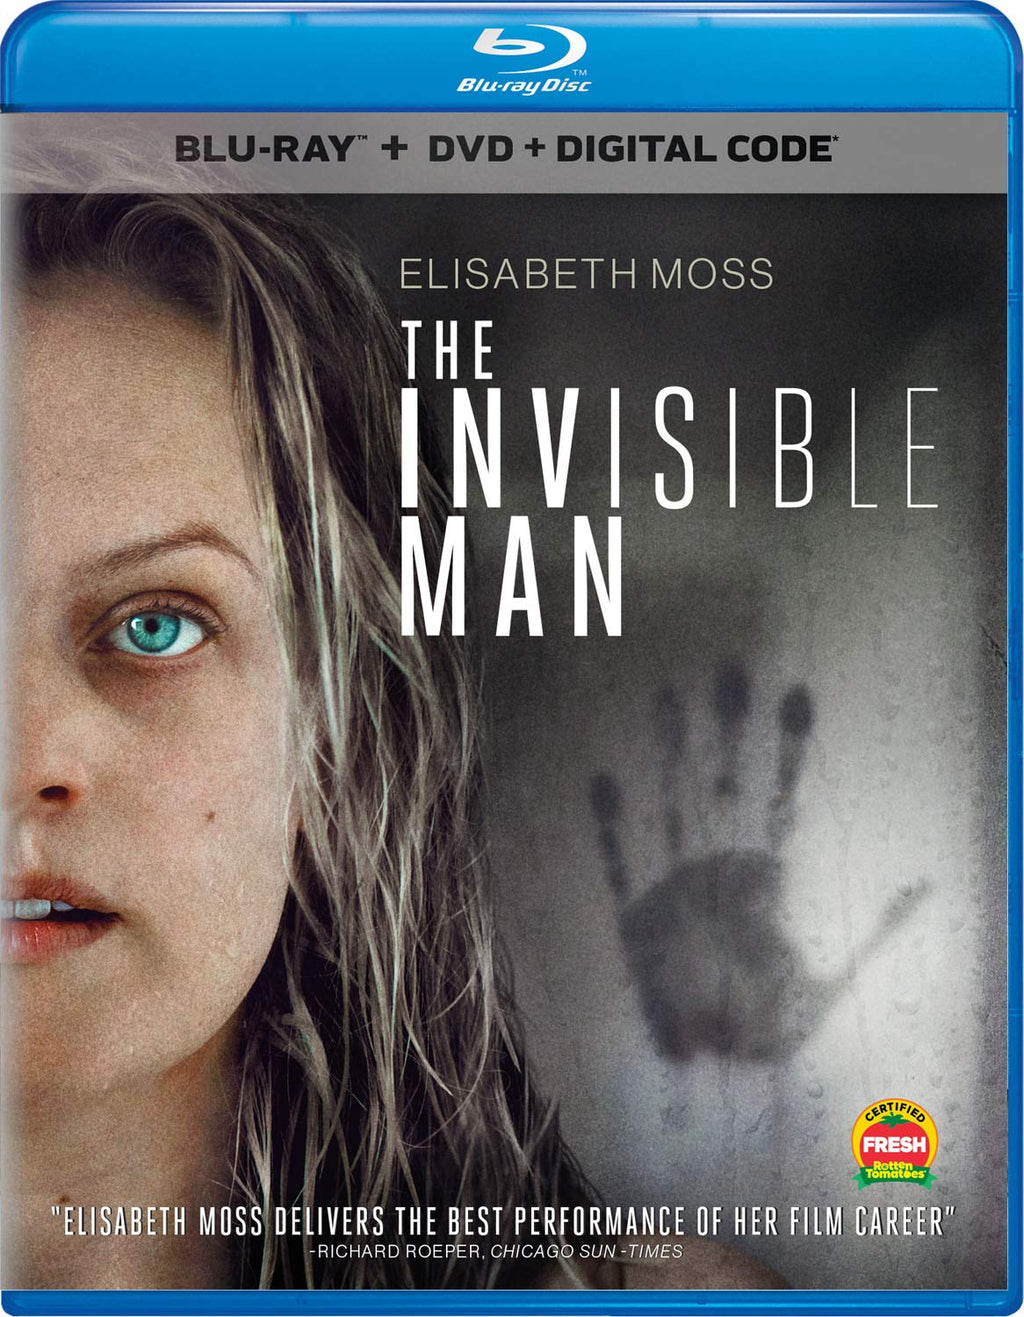 The Invisible Man (2020) Blu-ray + DVD